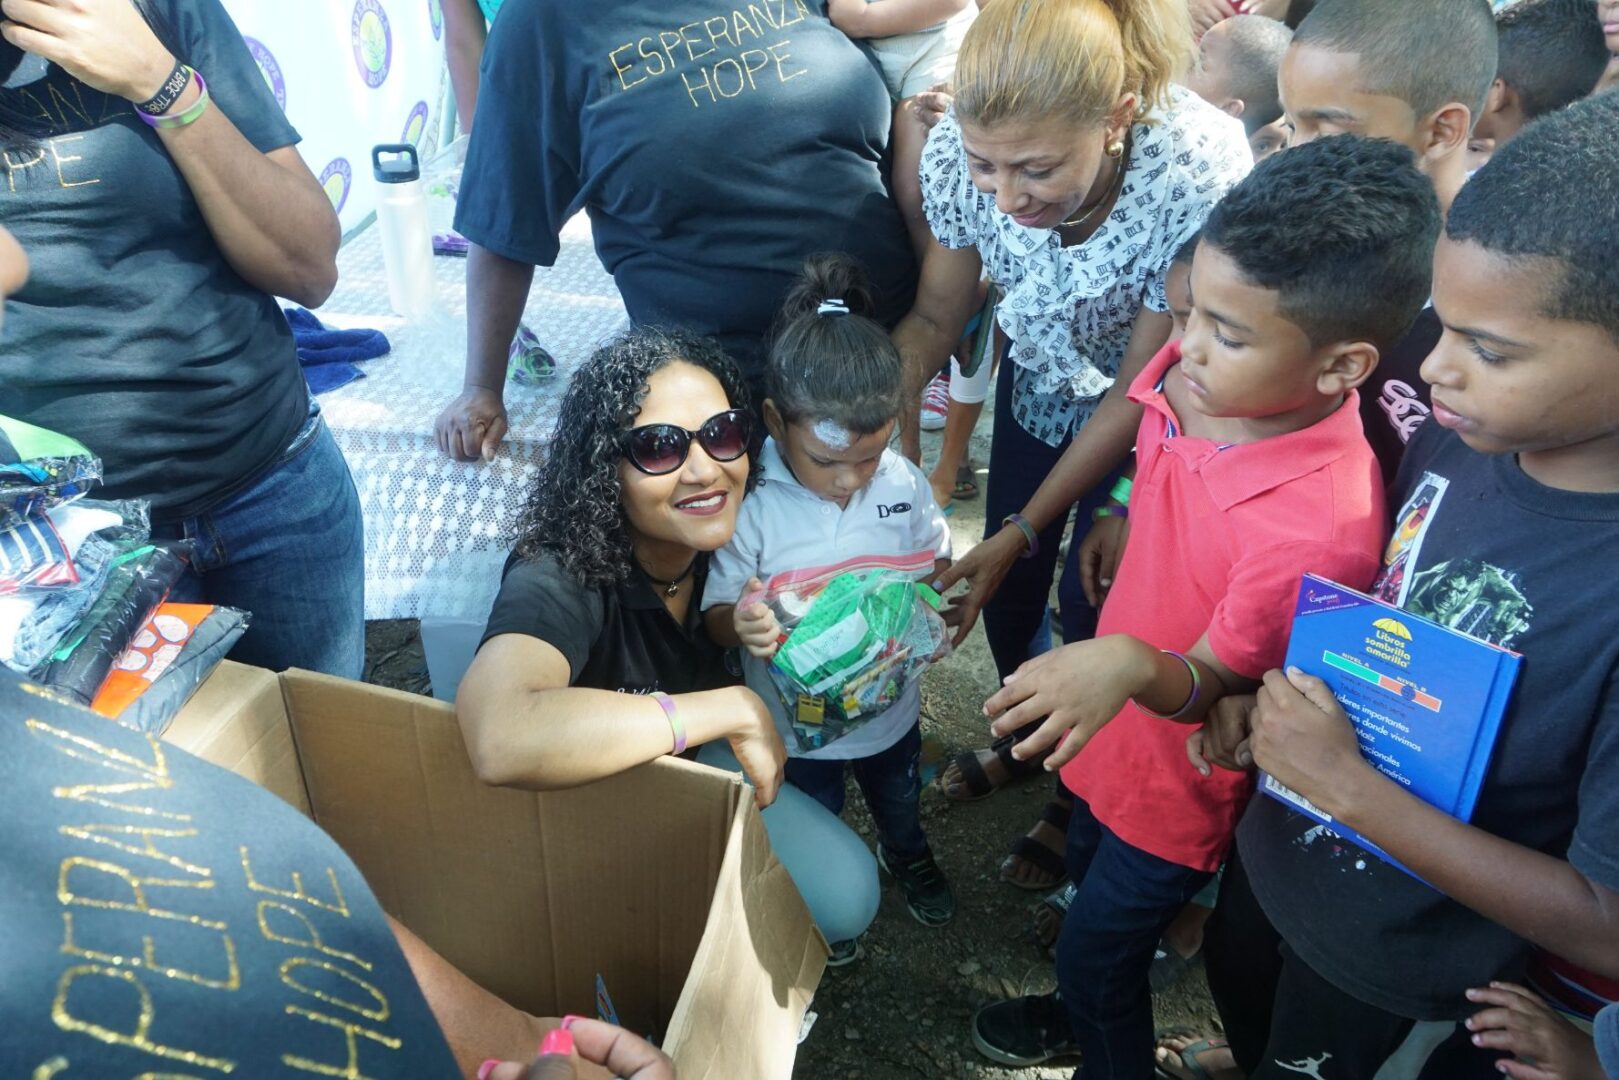 A female staff and a young child holding a plastic bag and surrounded by a crowd of parents and children